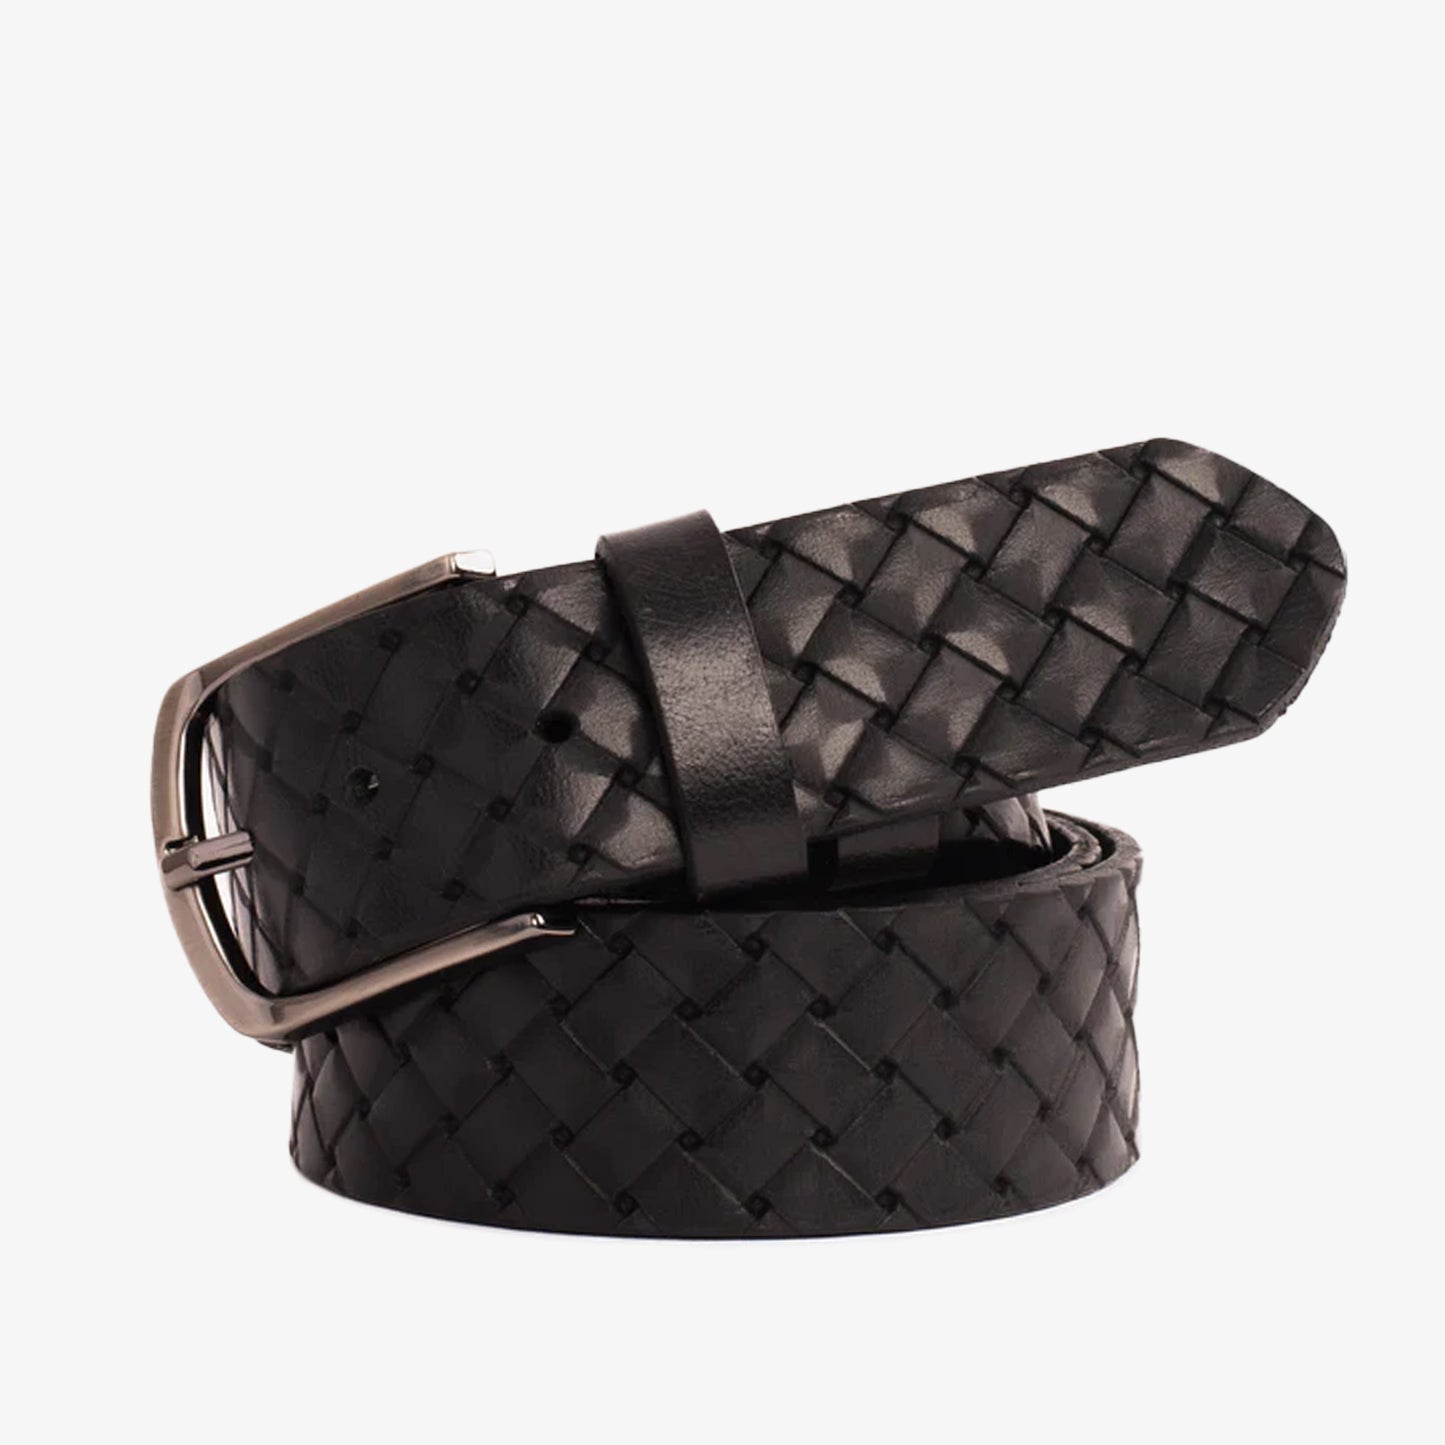 The Turan Black Woven Leather Belt